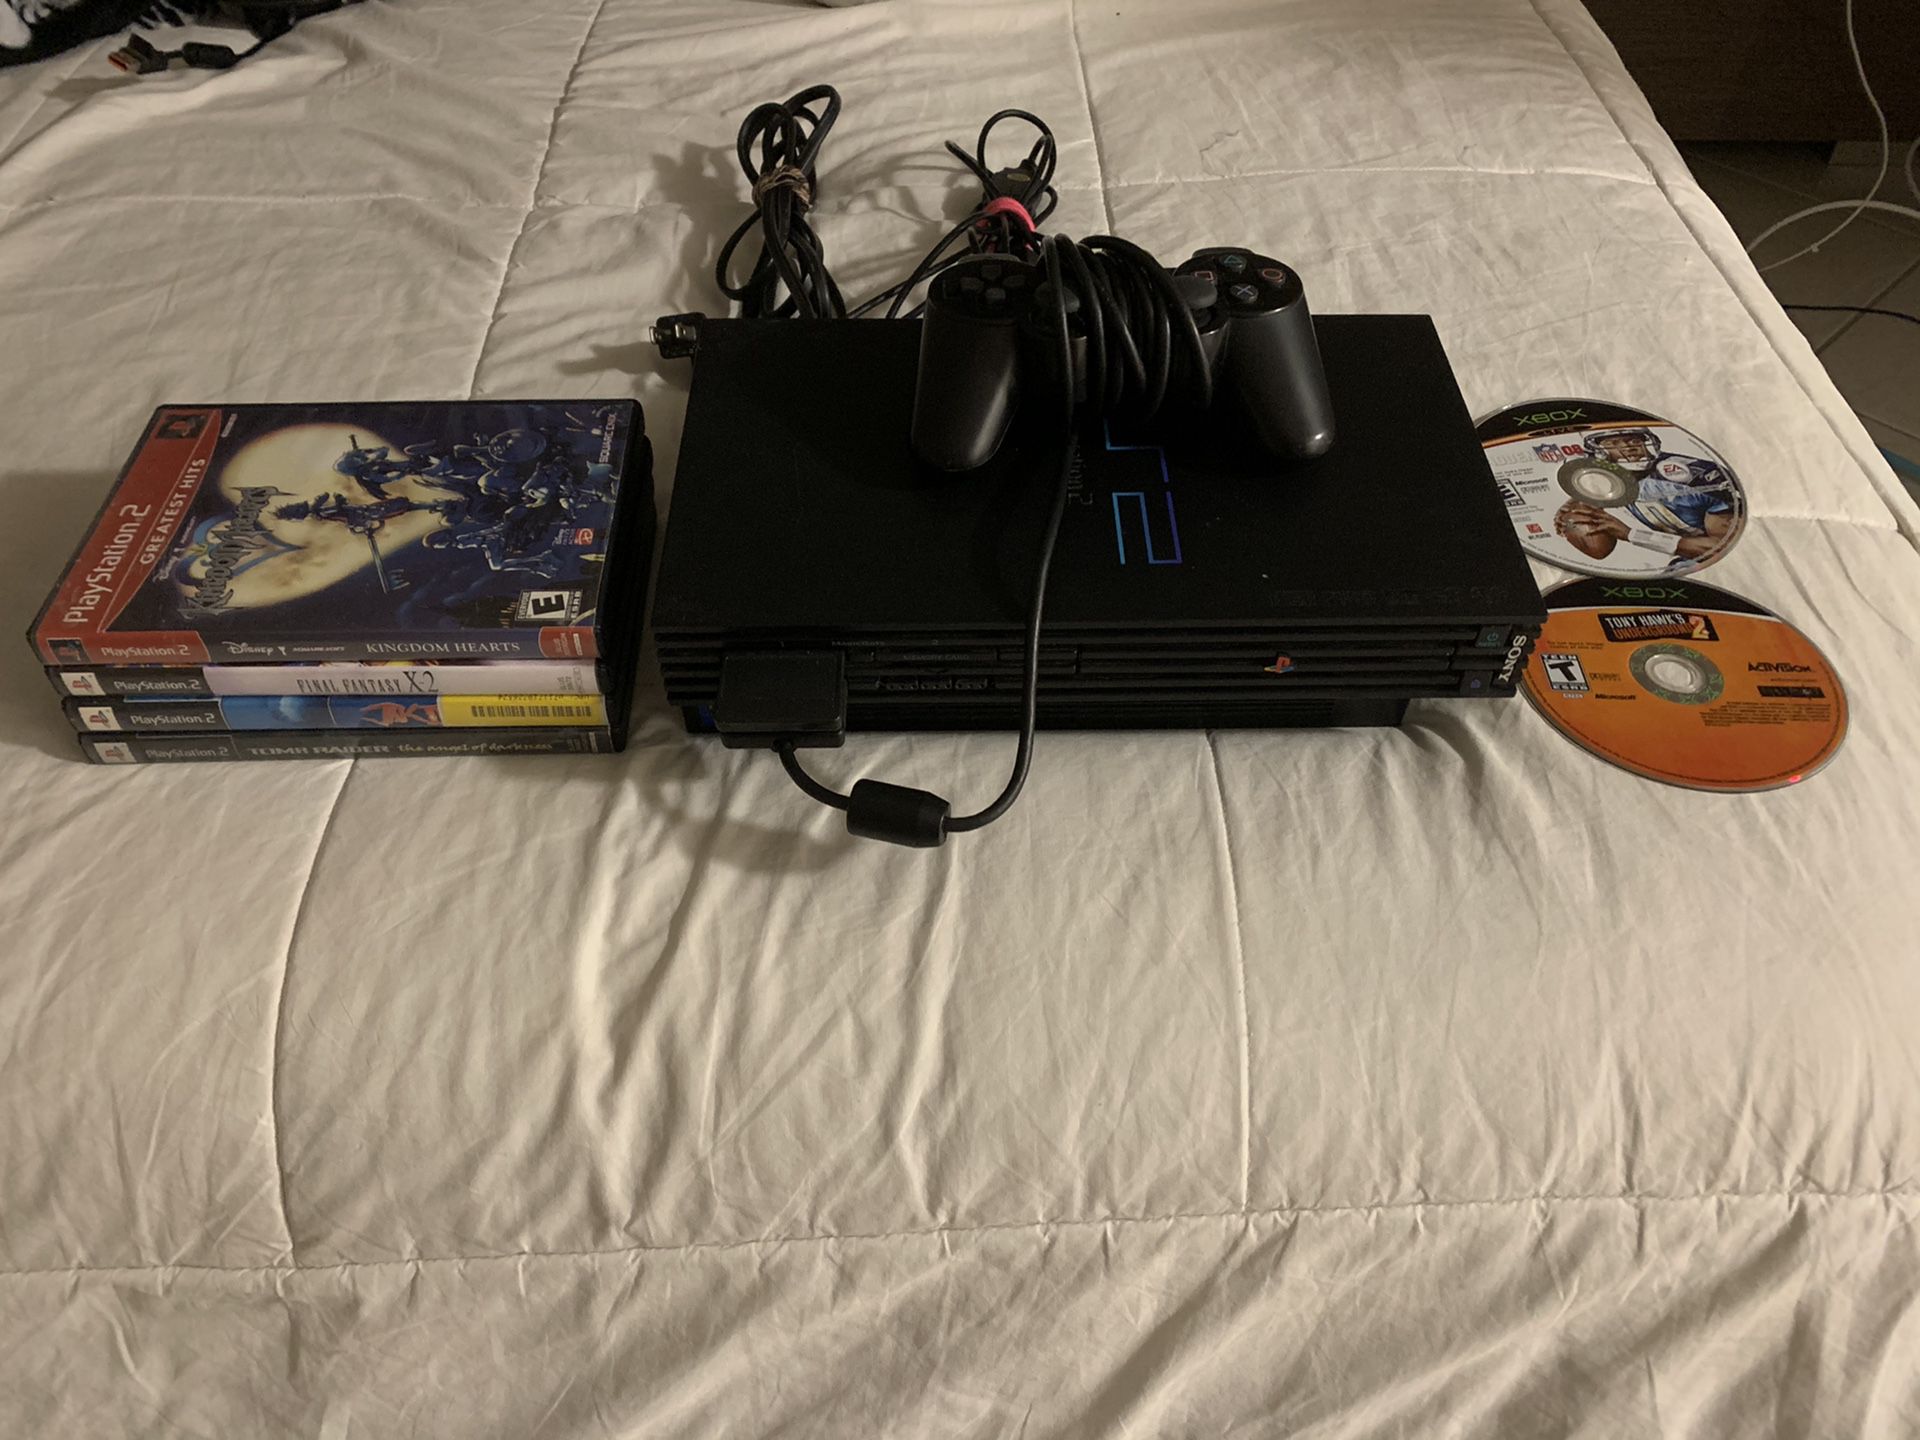 PS2 w/ 3 games and memory card